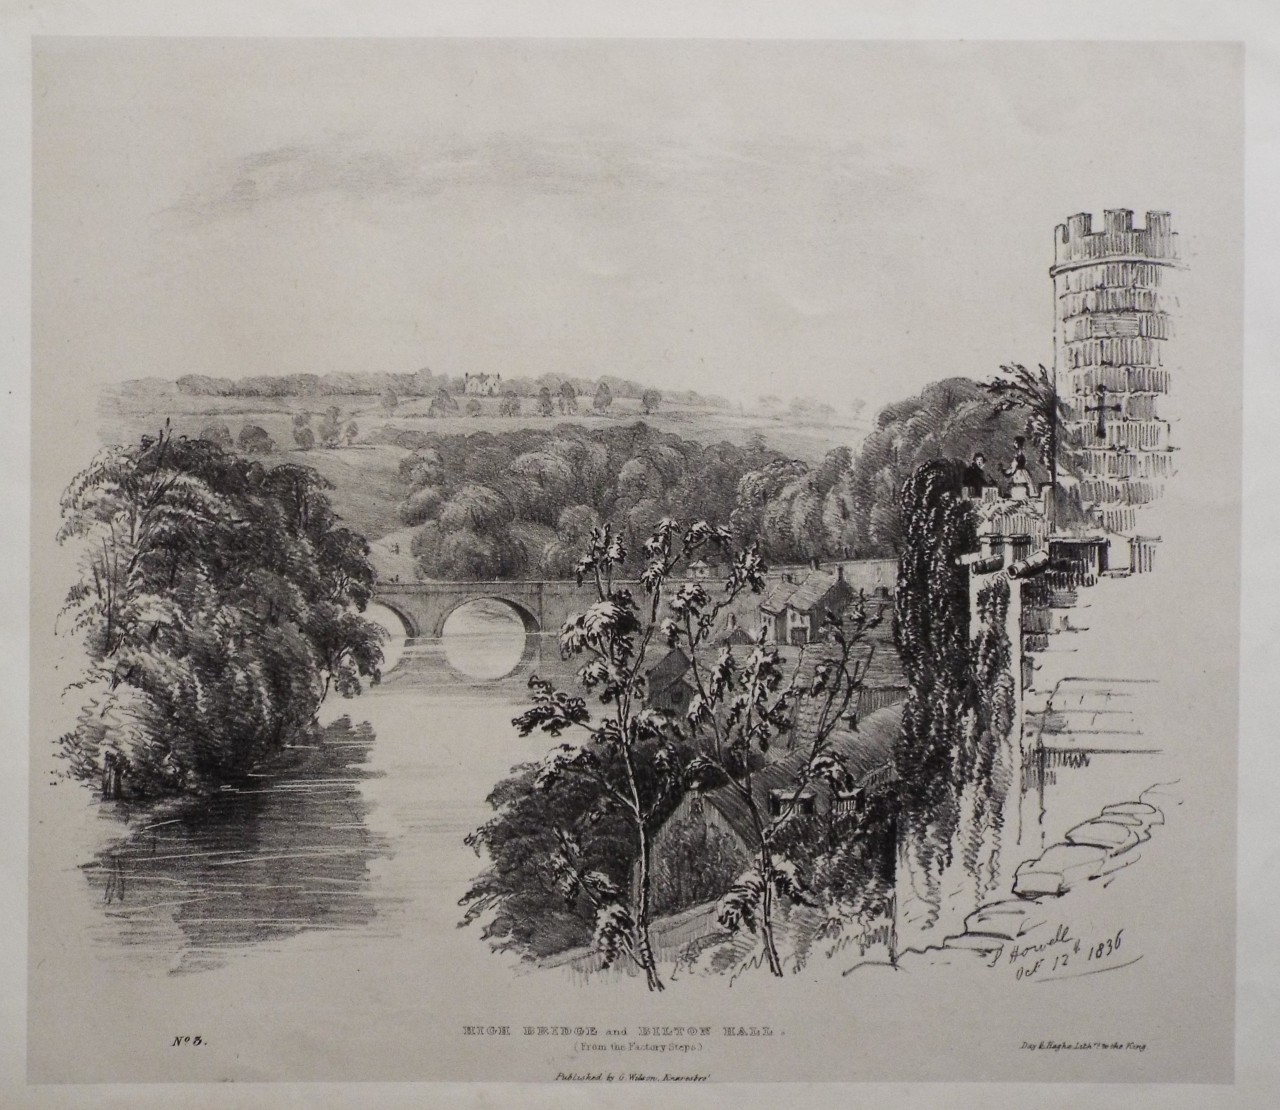 Lithograph - High Bridge and Bilton Hall. (From the Factory Steps.) - Howell